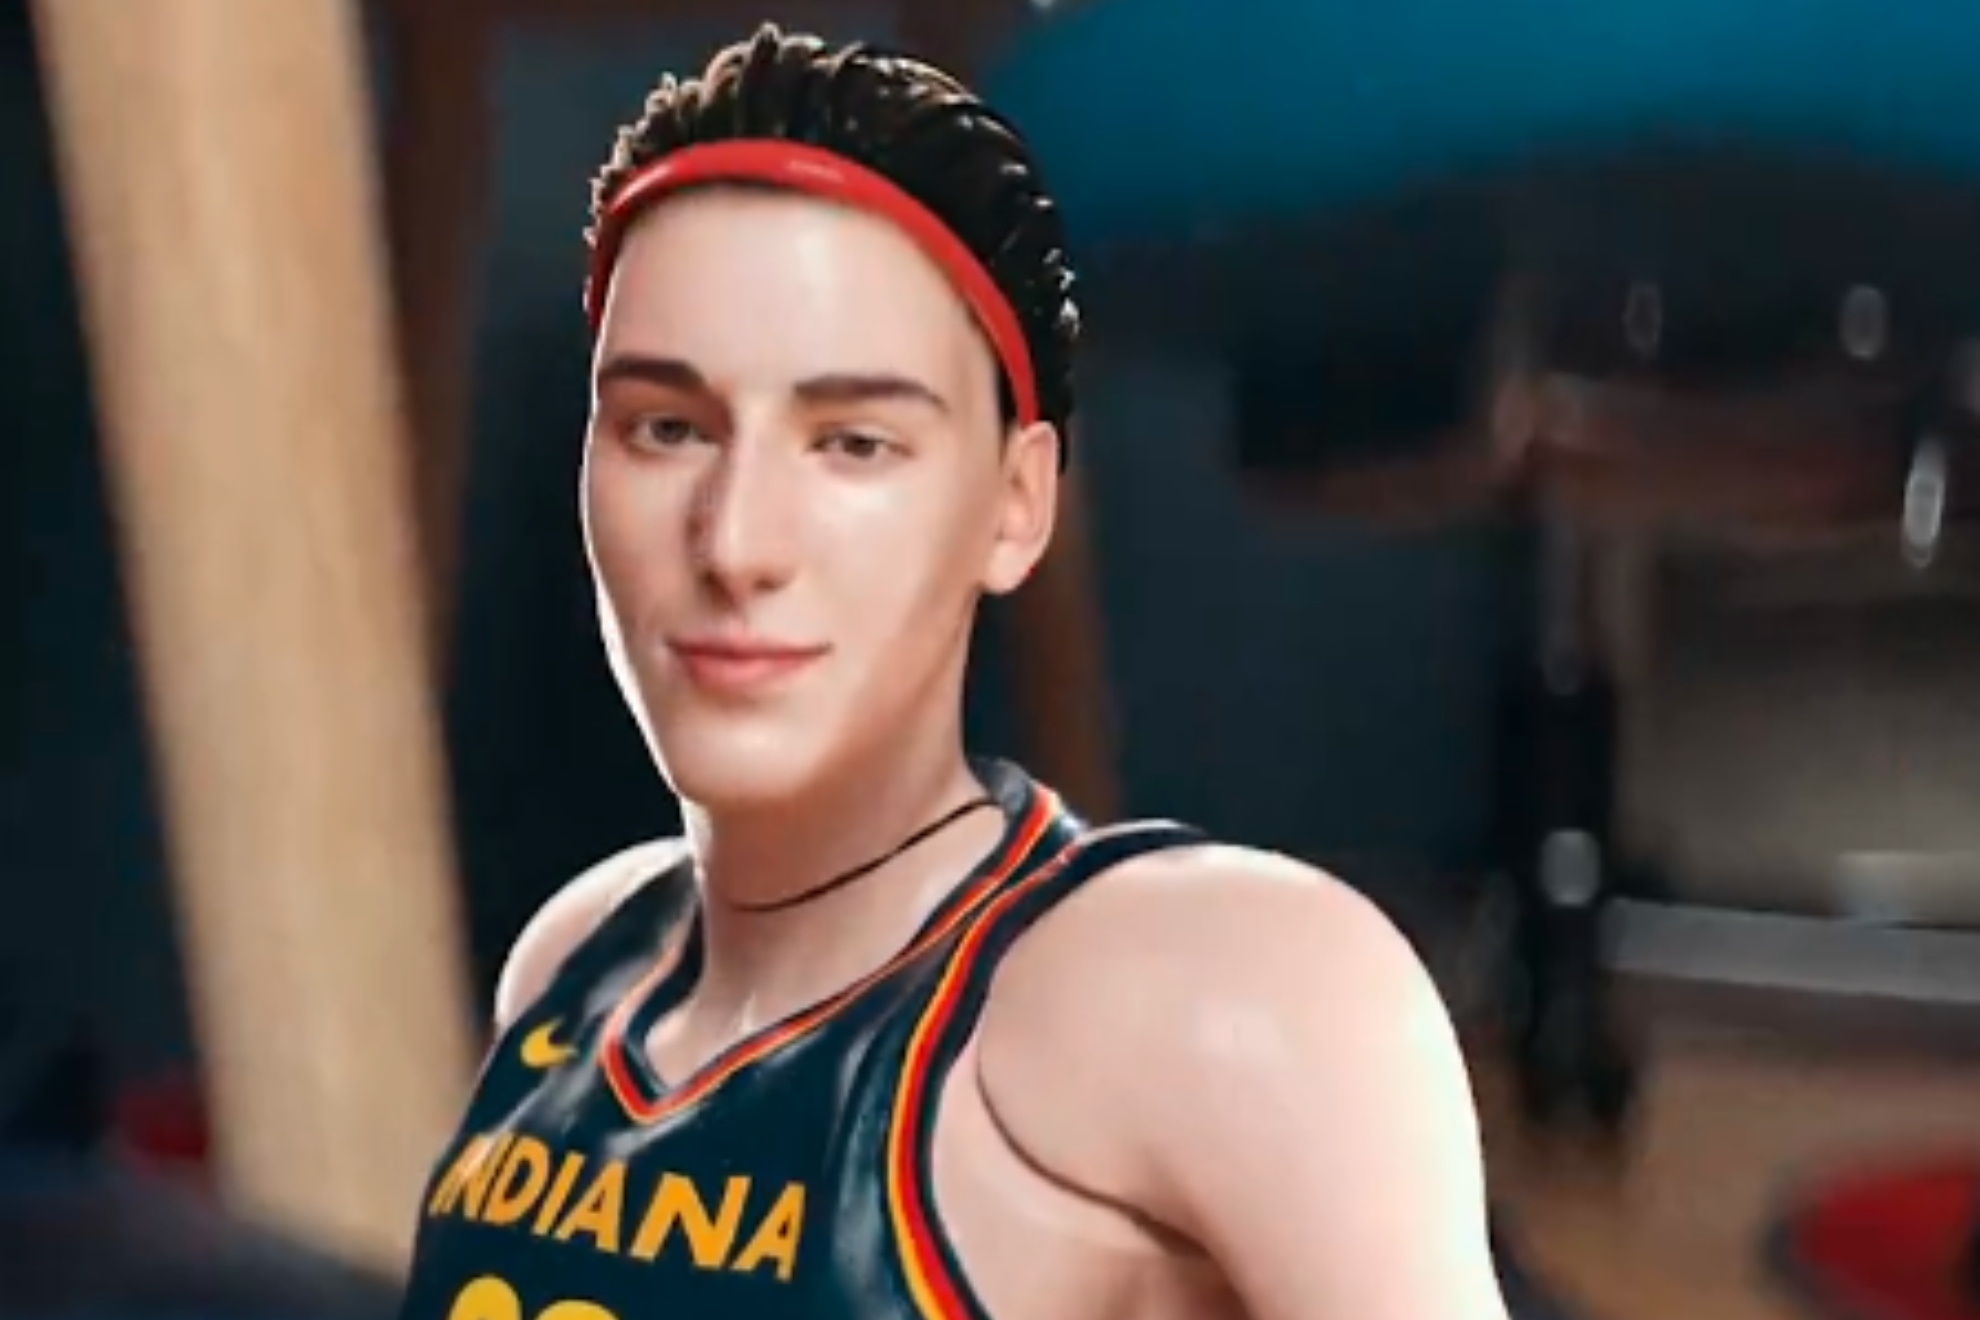 Indiana Fever creates jaw-dropping 3D animation of Caitlin Clark to welcome her to the WNBA